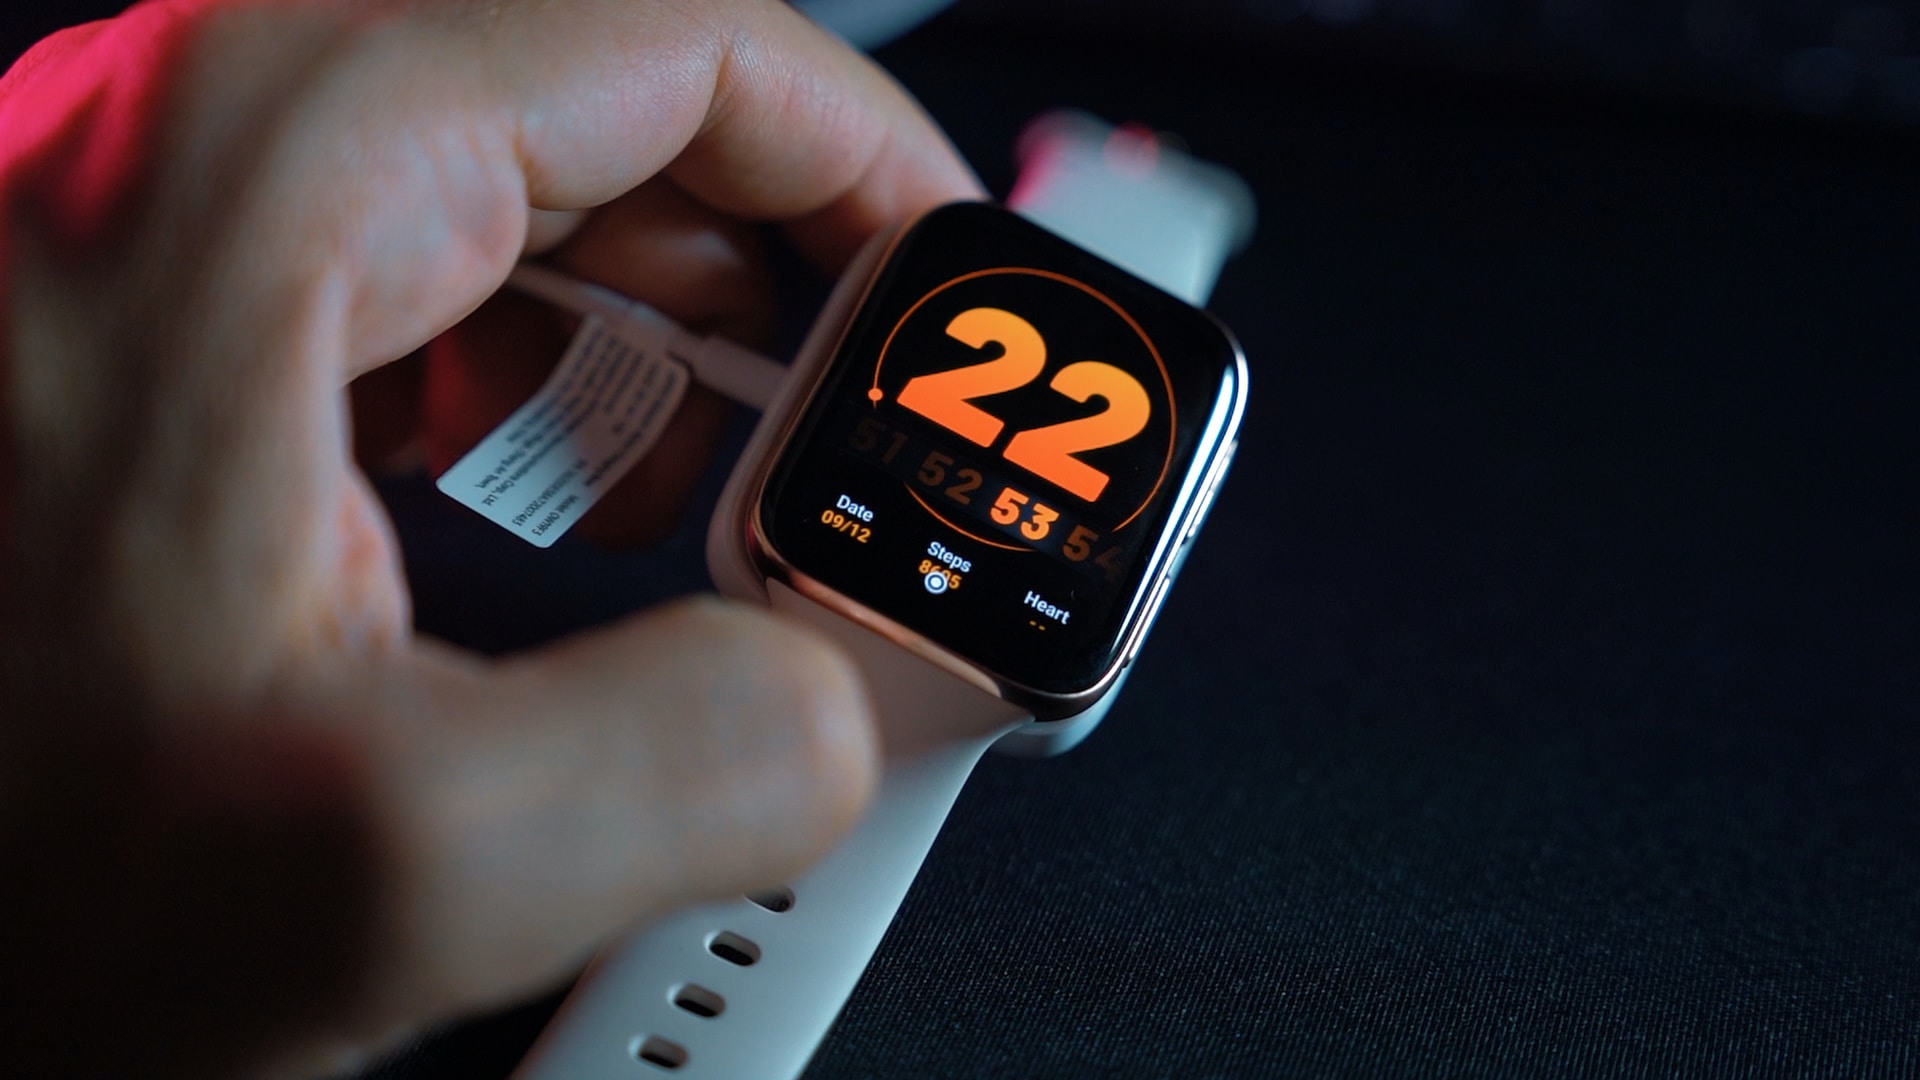 Smartwatches: Advantages, Disadvantages, and Things to Consider Before Buying